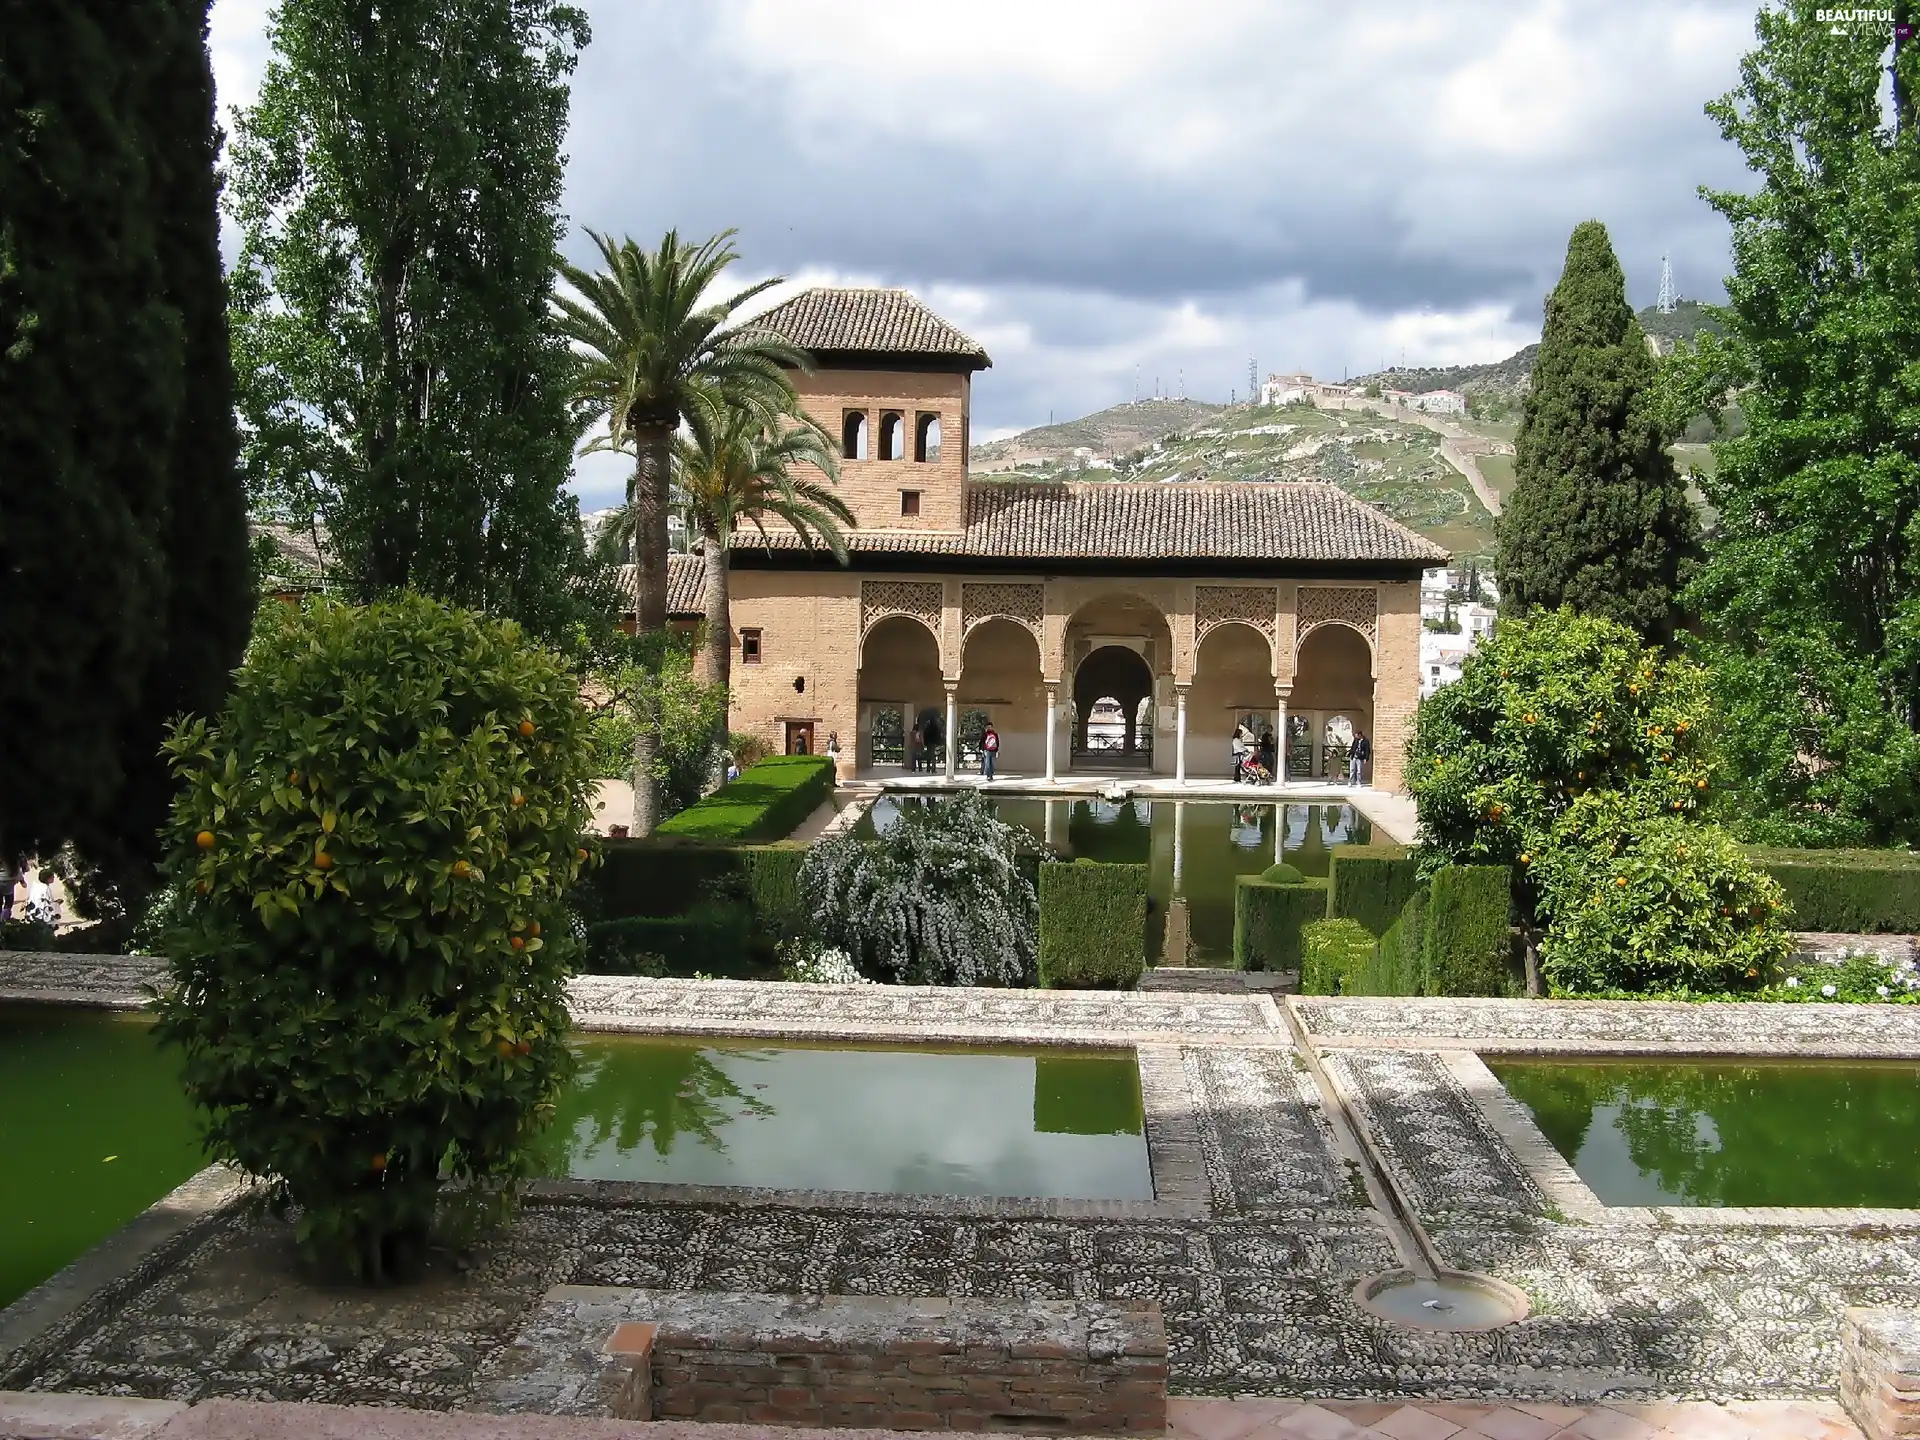 palace, Garden, fortified, Team, alhambra